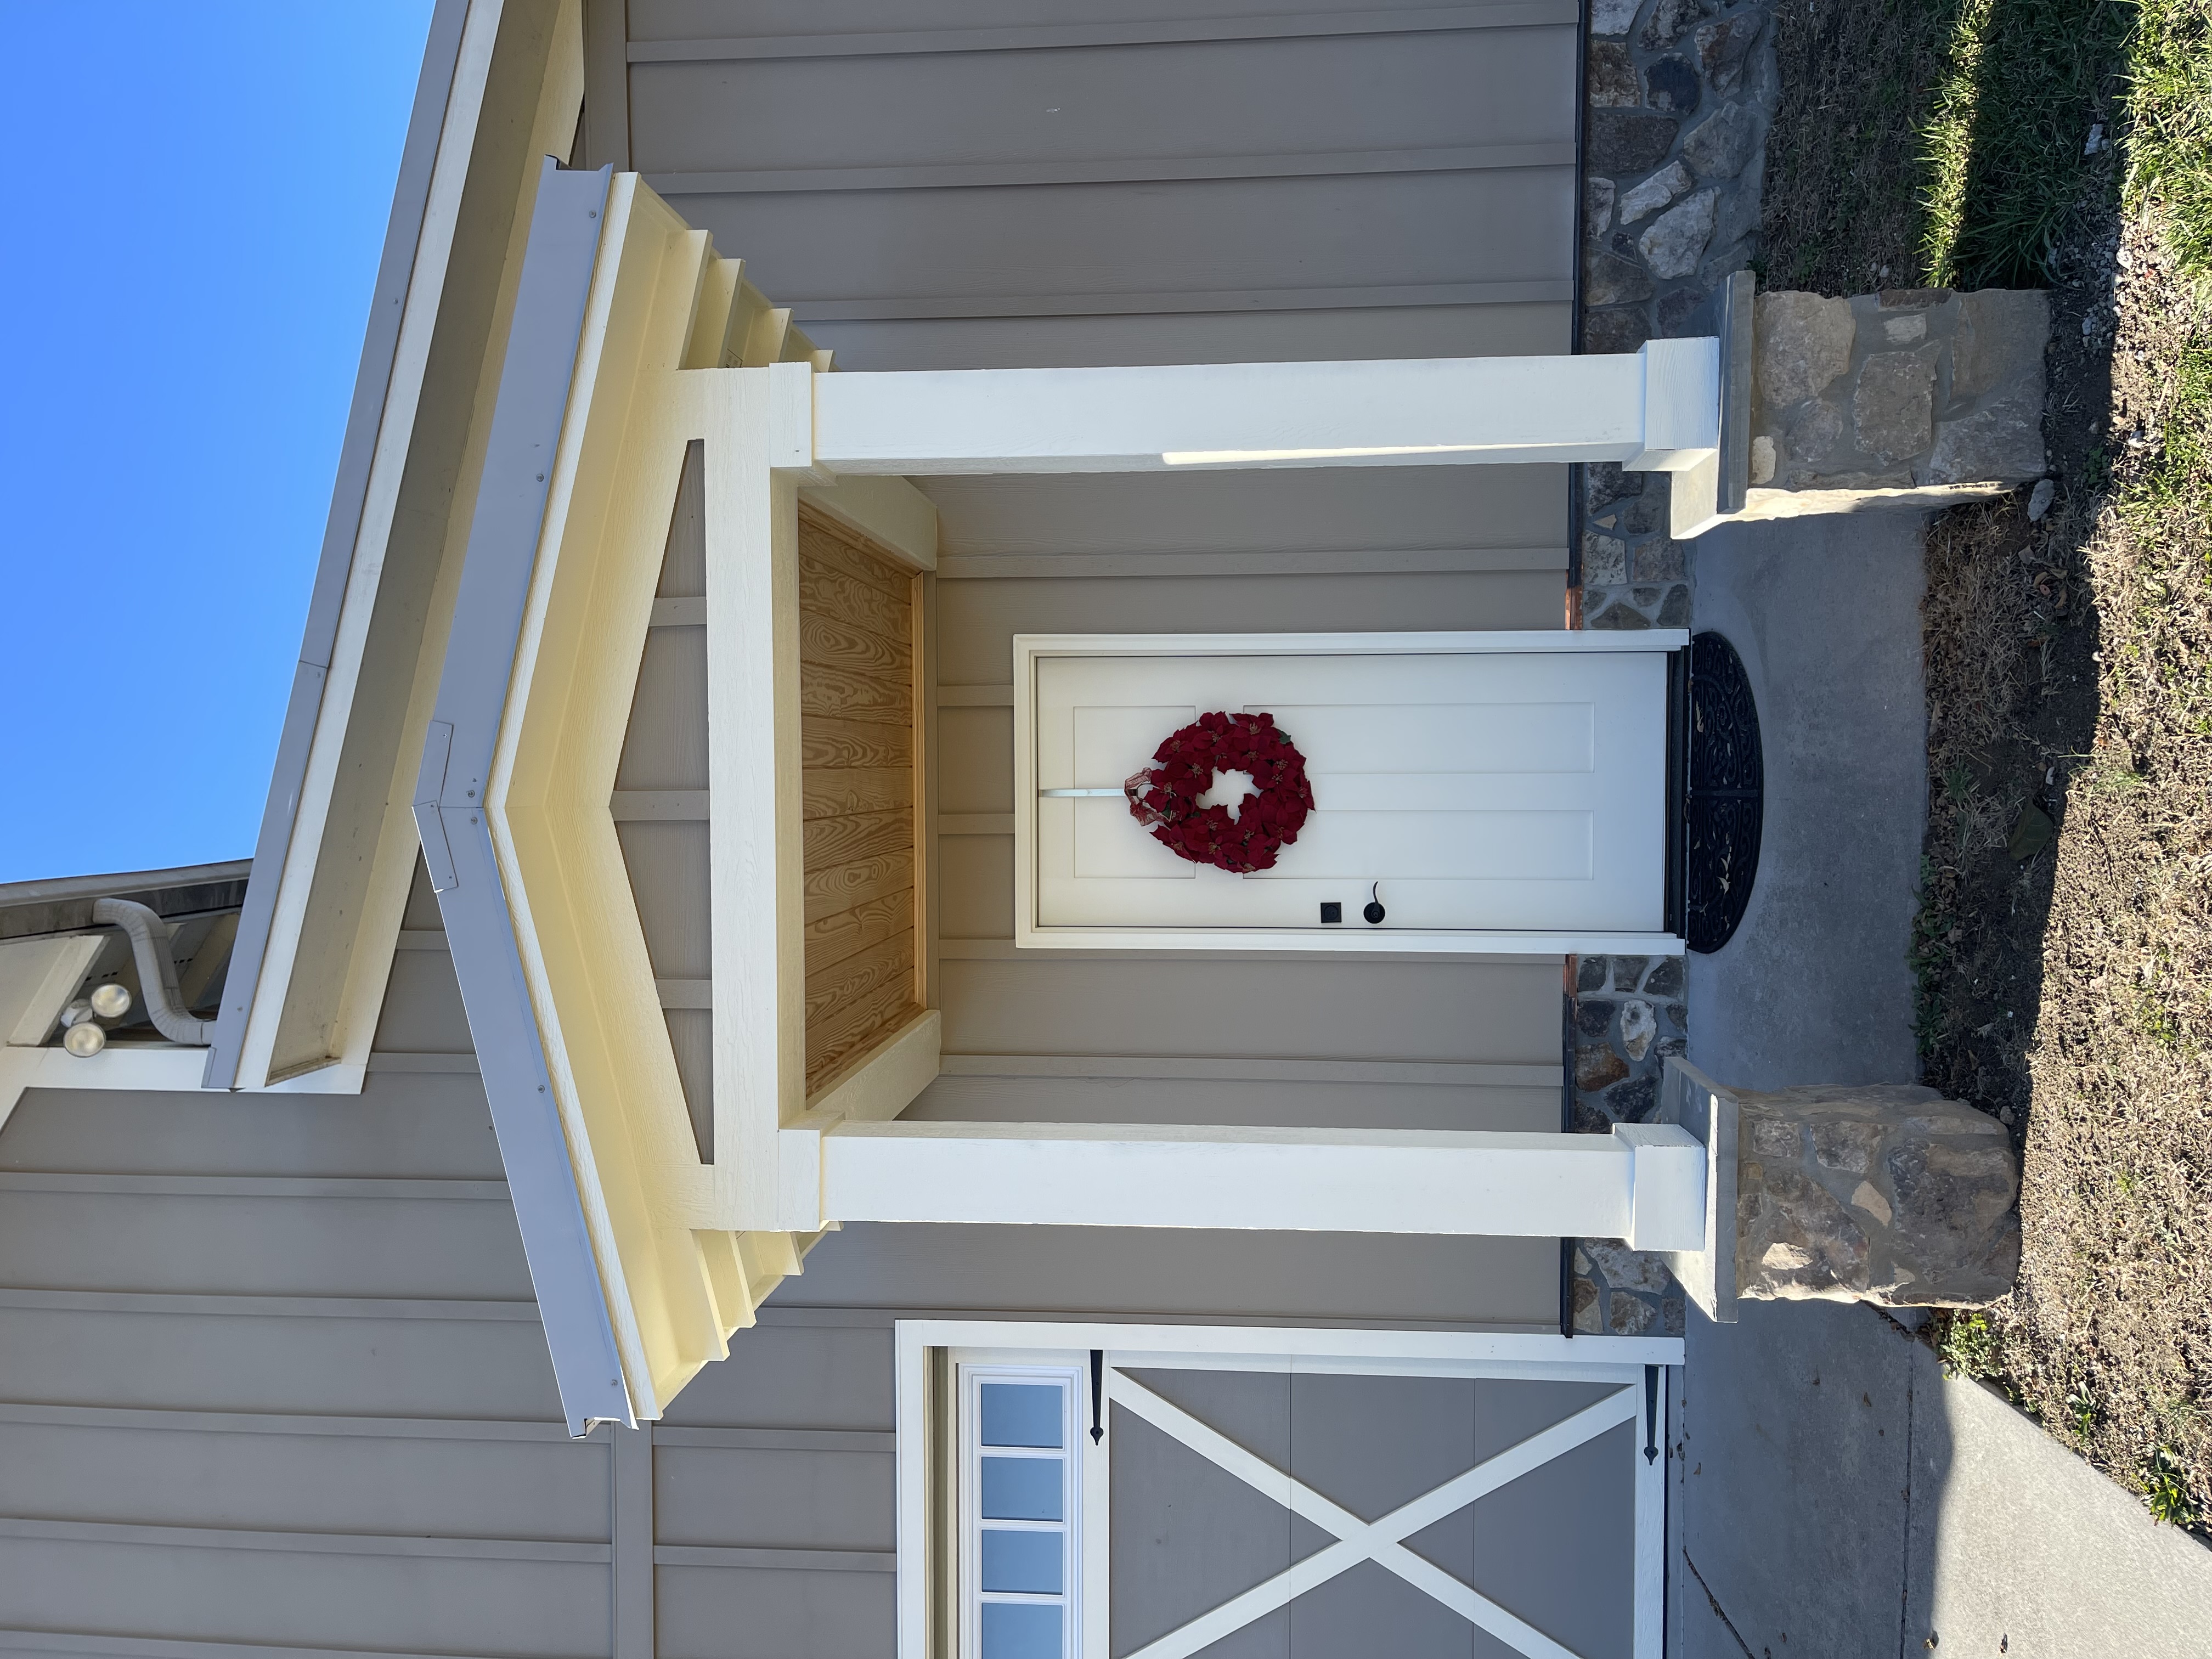 Newly Installed Gable and Door in Summerfield, NC